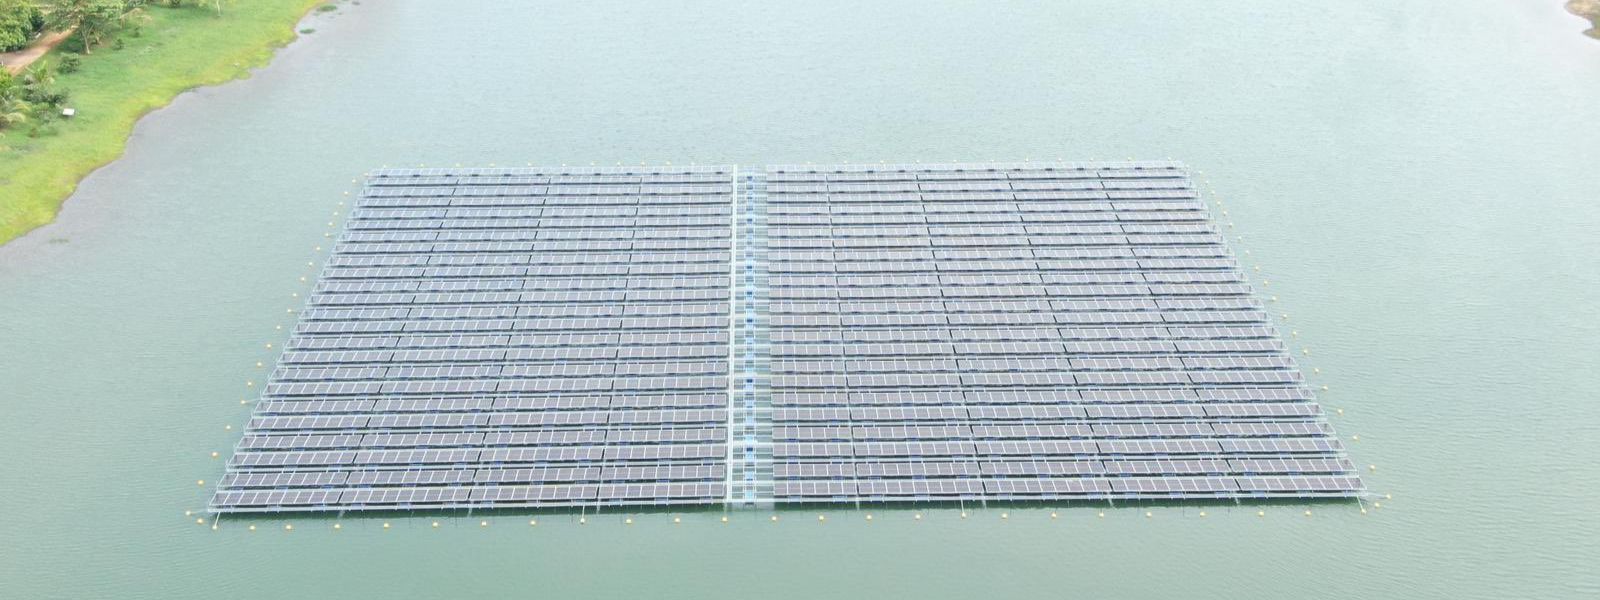 Floating Solar Projects Nearing Completion